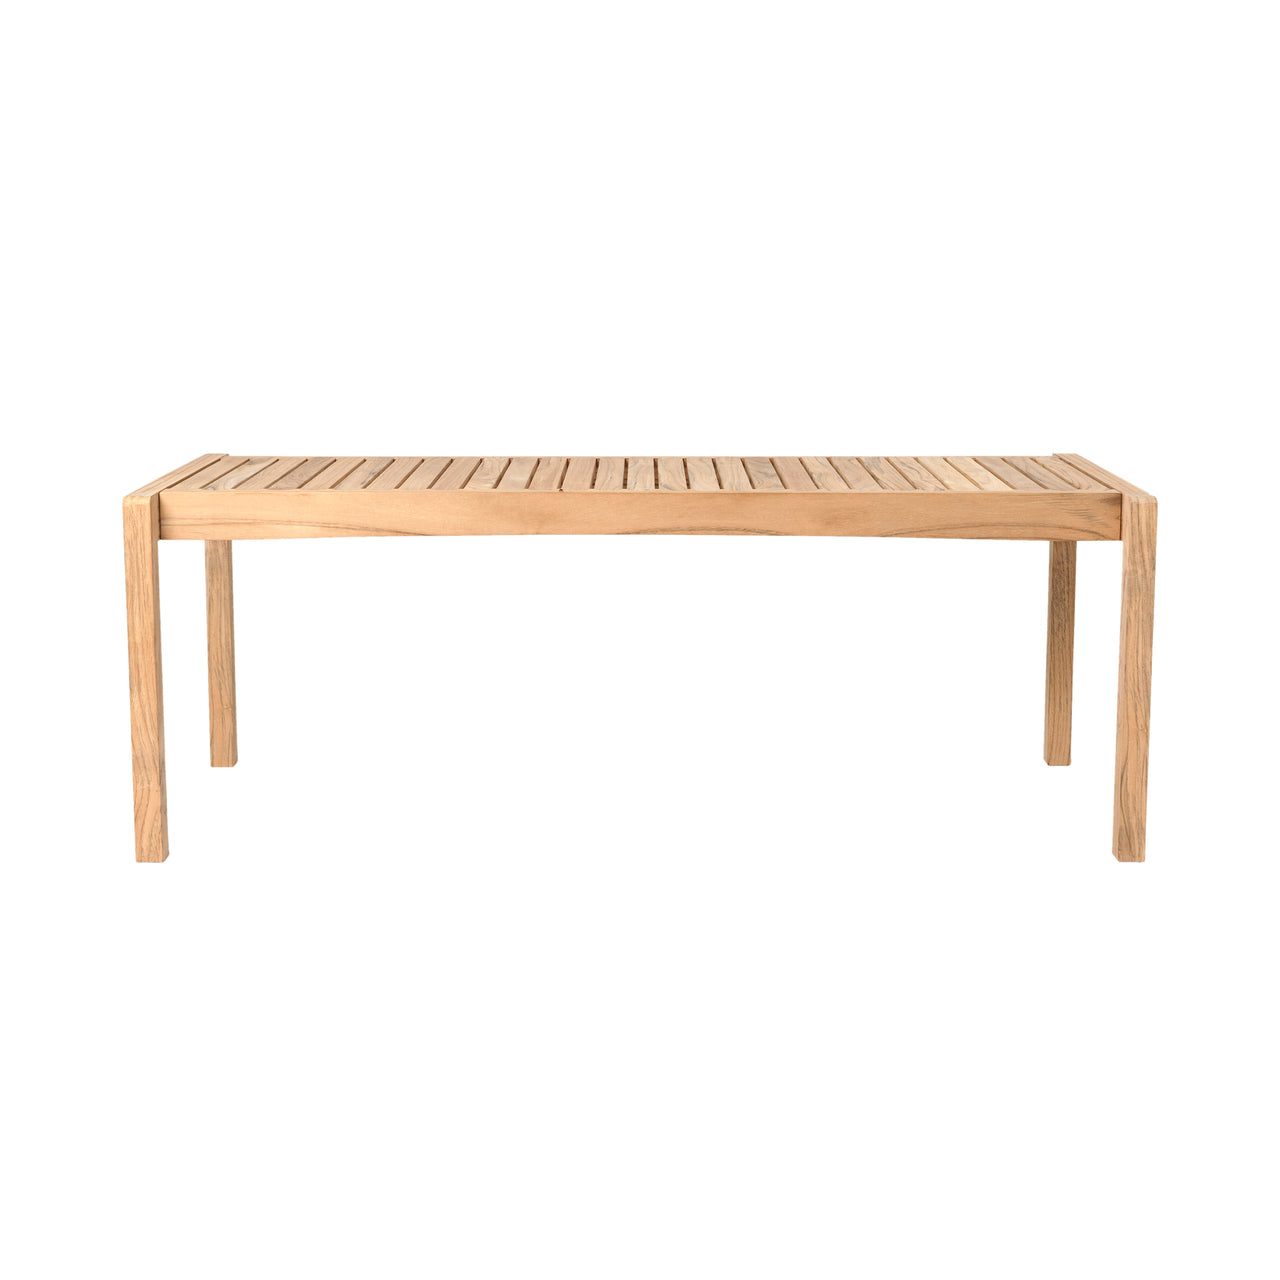 AH912 Outdoor Table Bench: Without Cushion